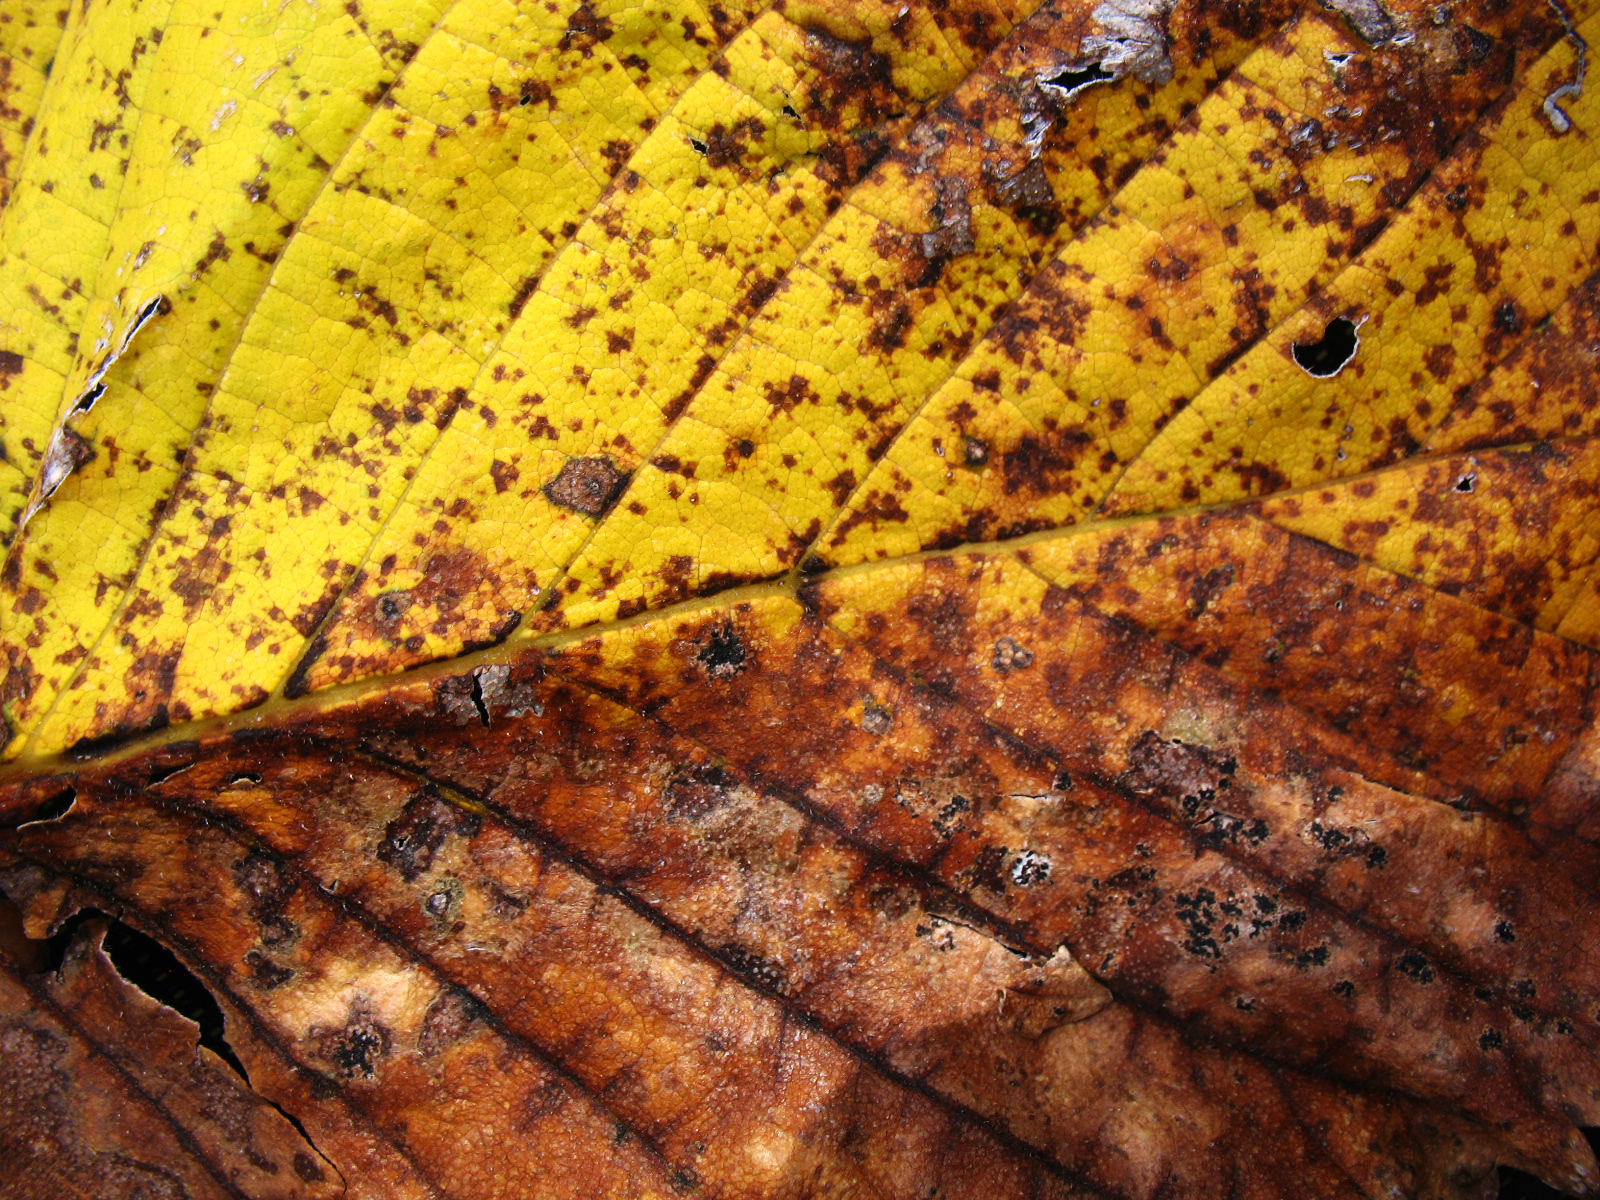 Leaf, brown, yellow, dried texture